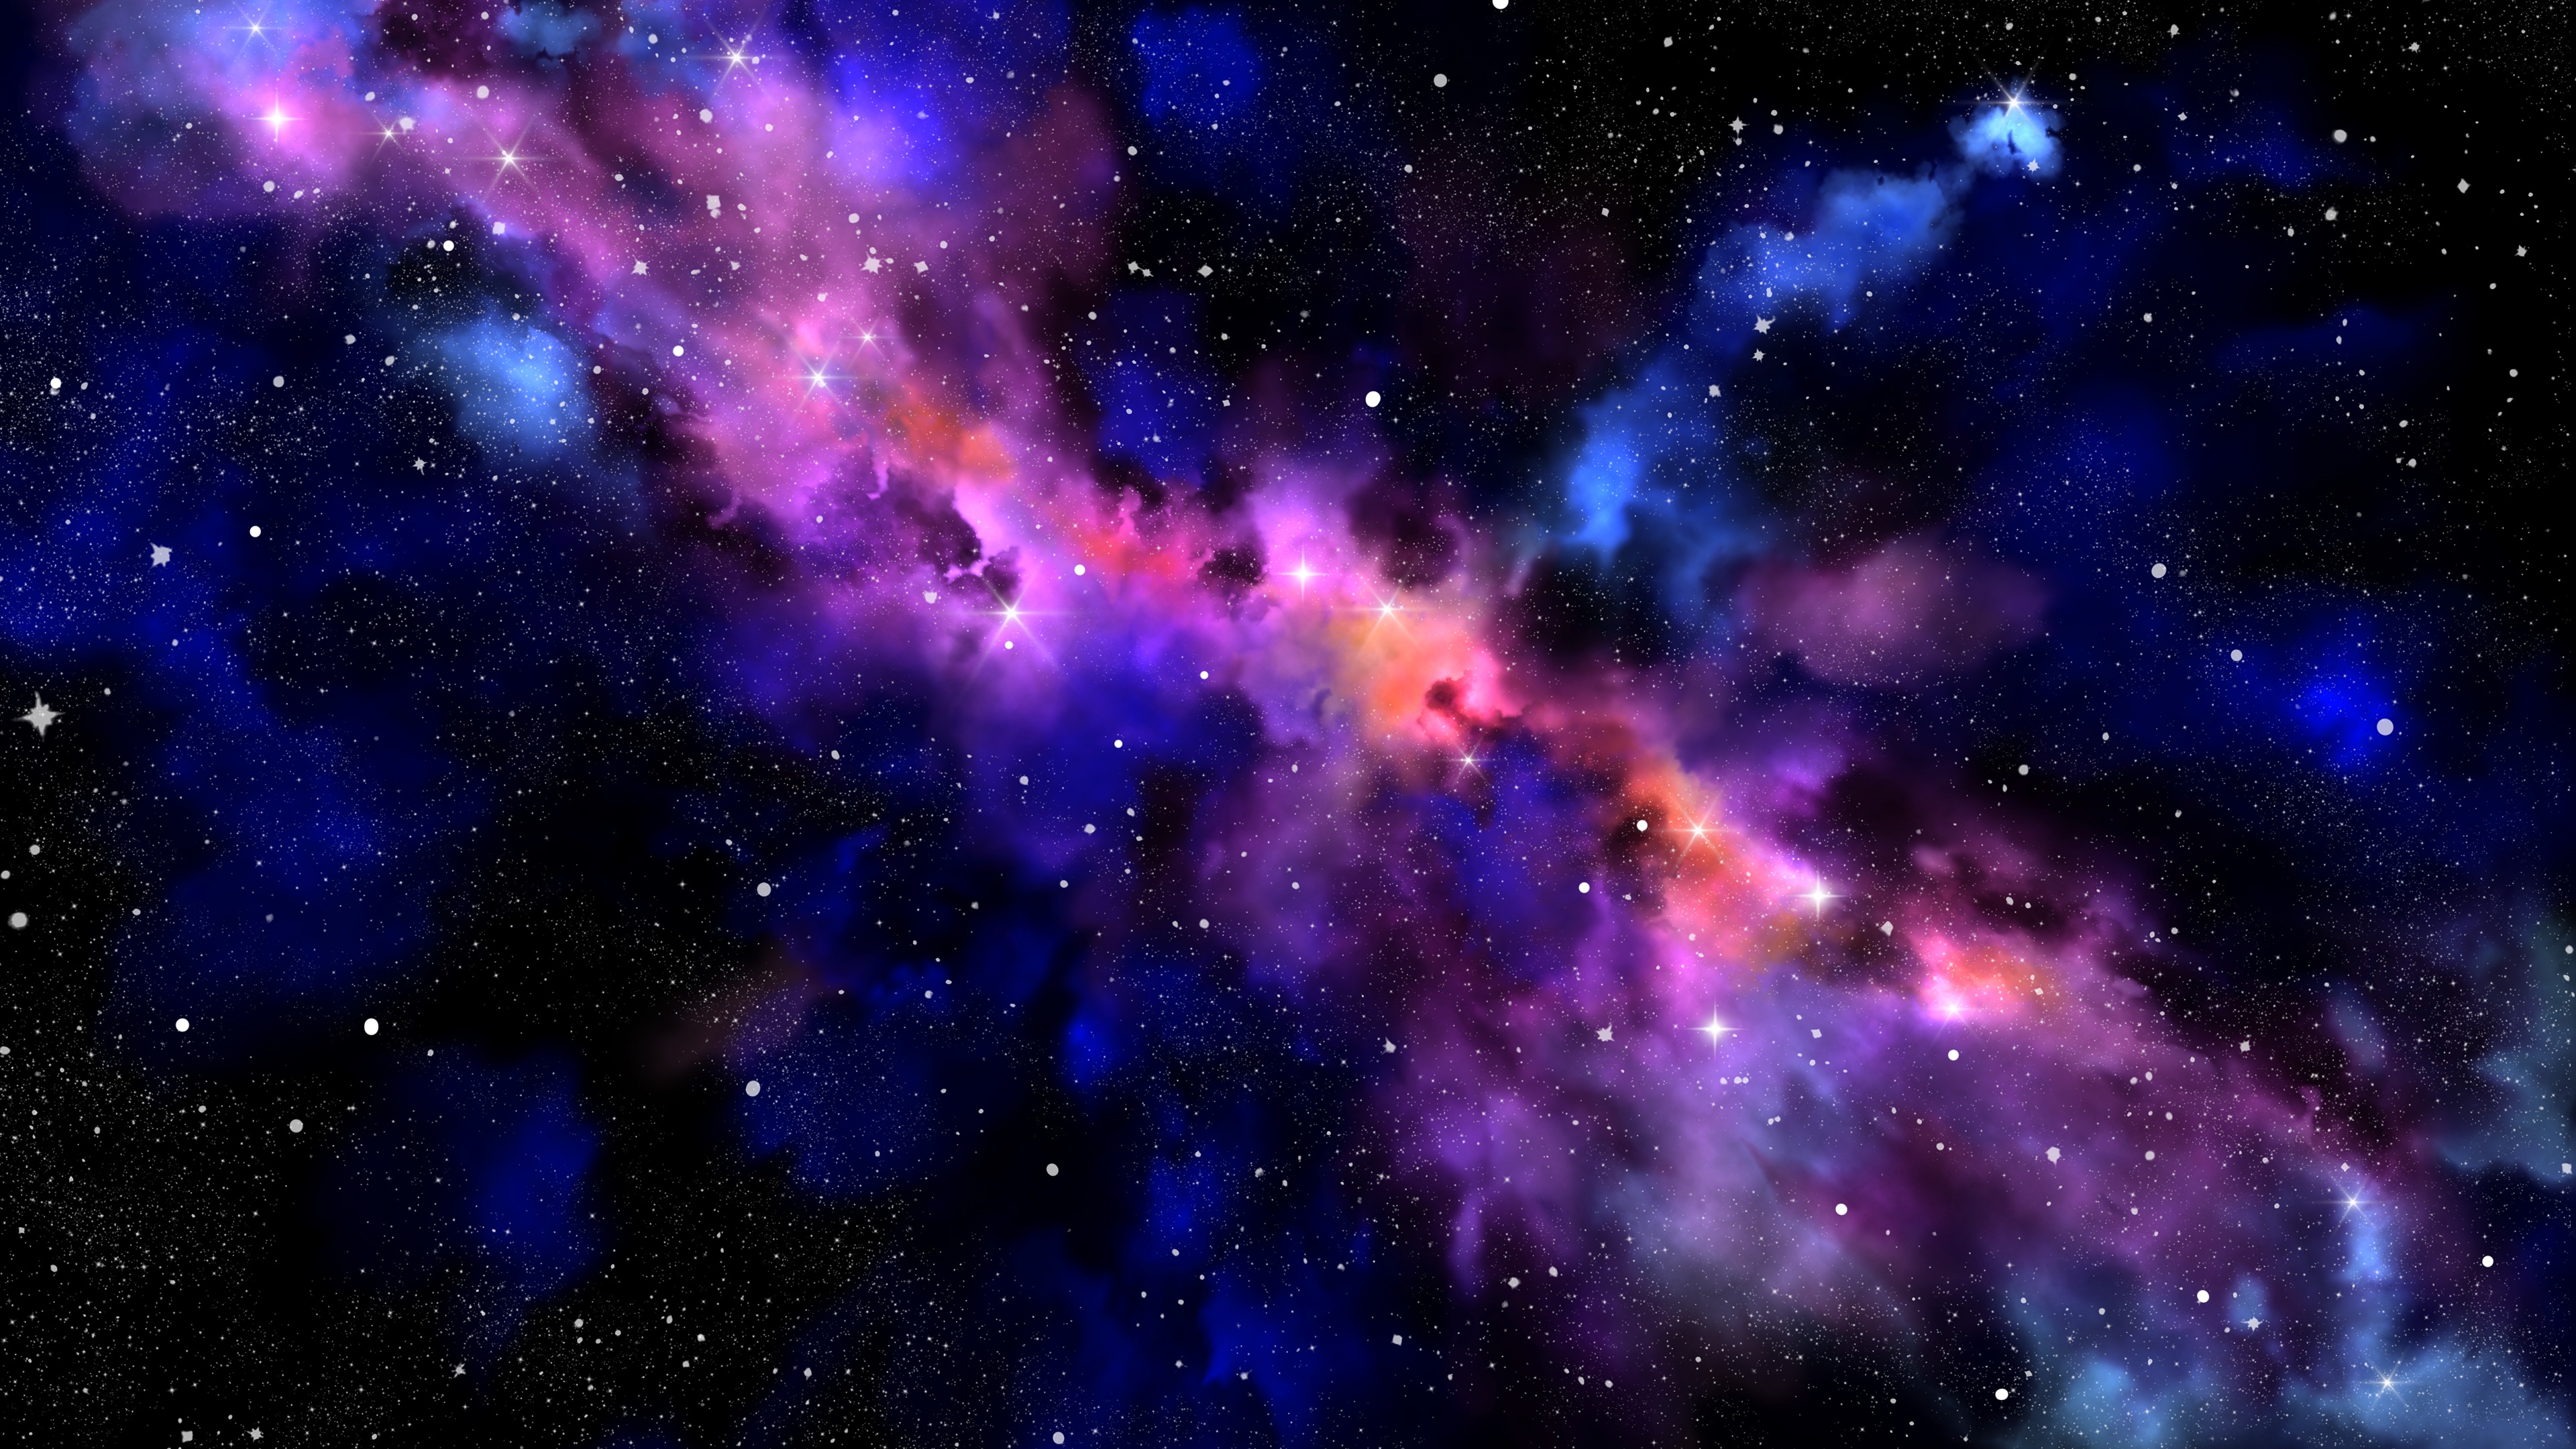 Space and Galaxy Wallpaper HD - Apps on Google Play